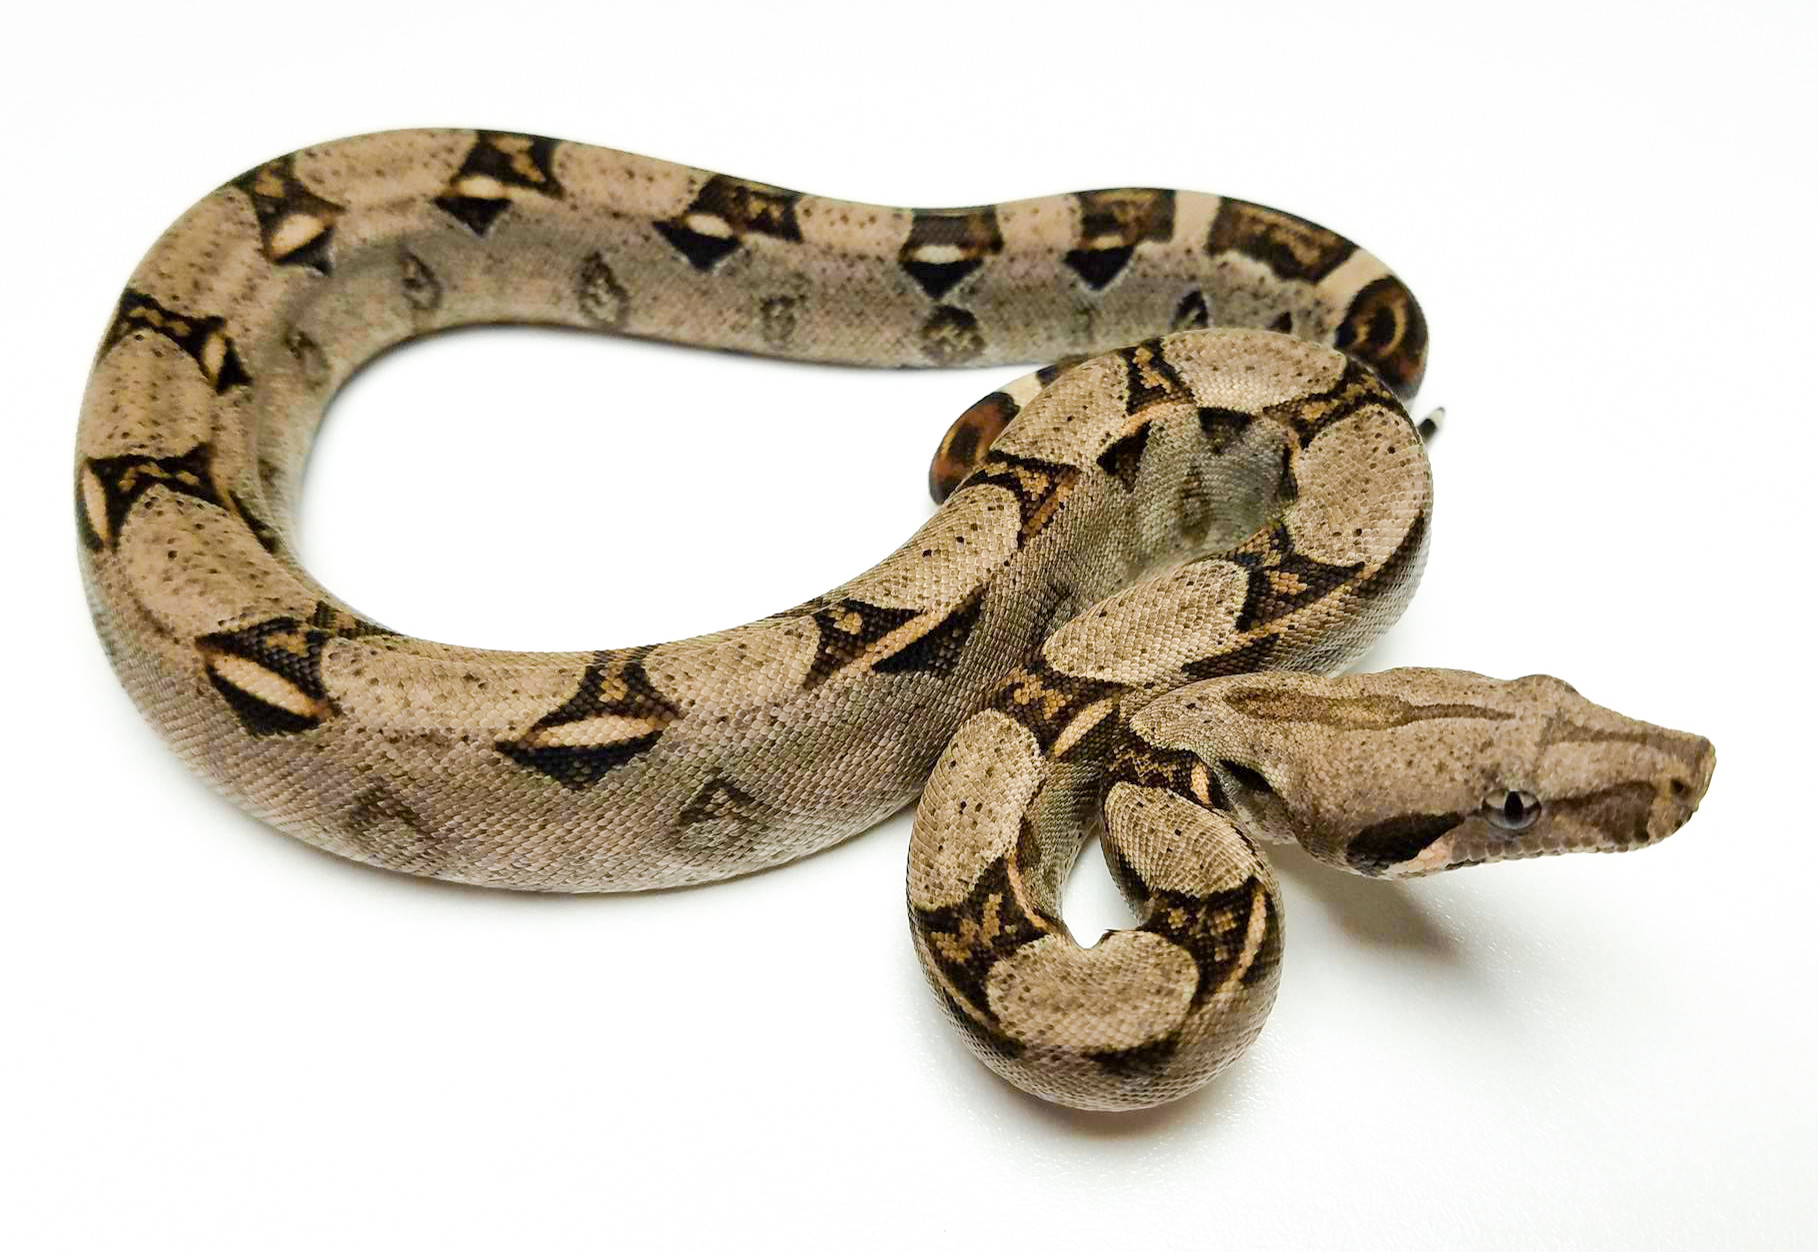 Normal Boa Constrictor by KBK Reptiles